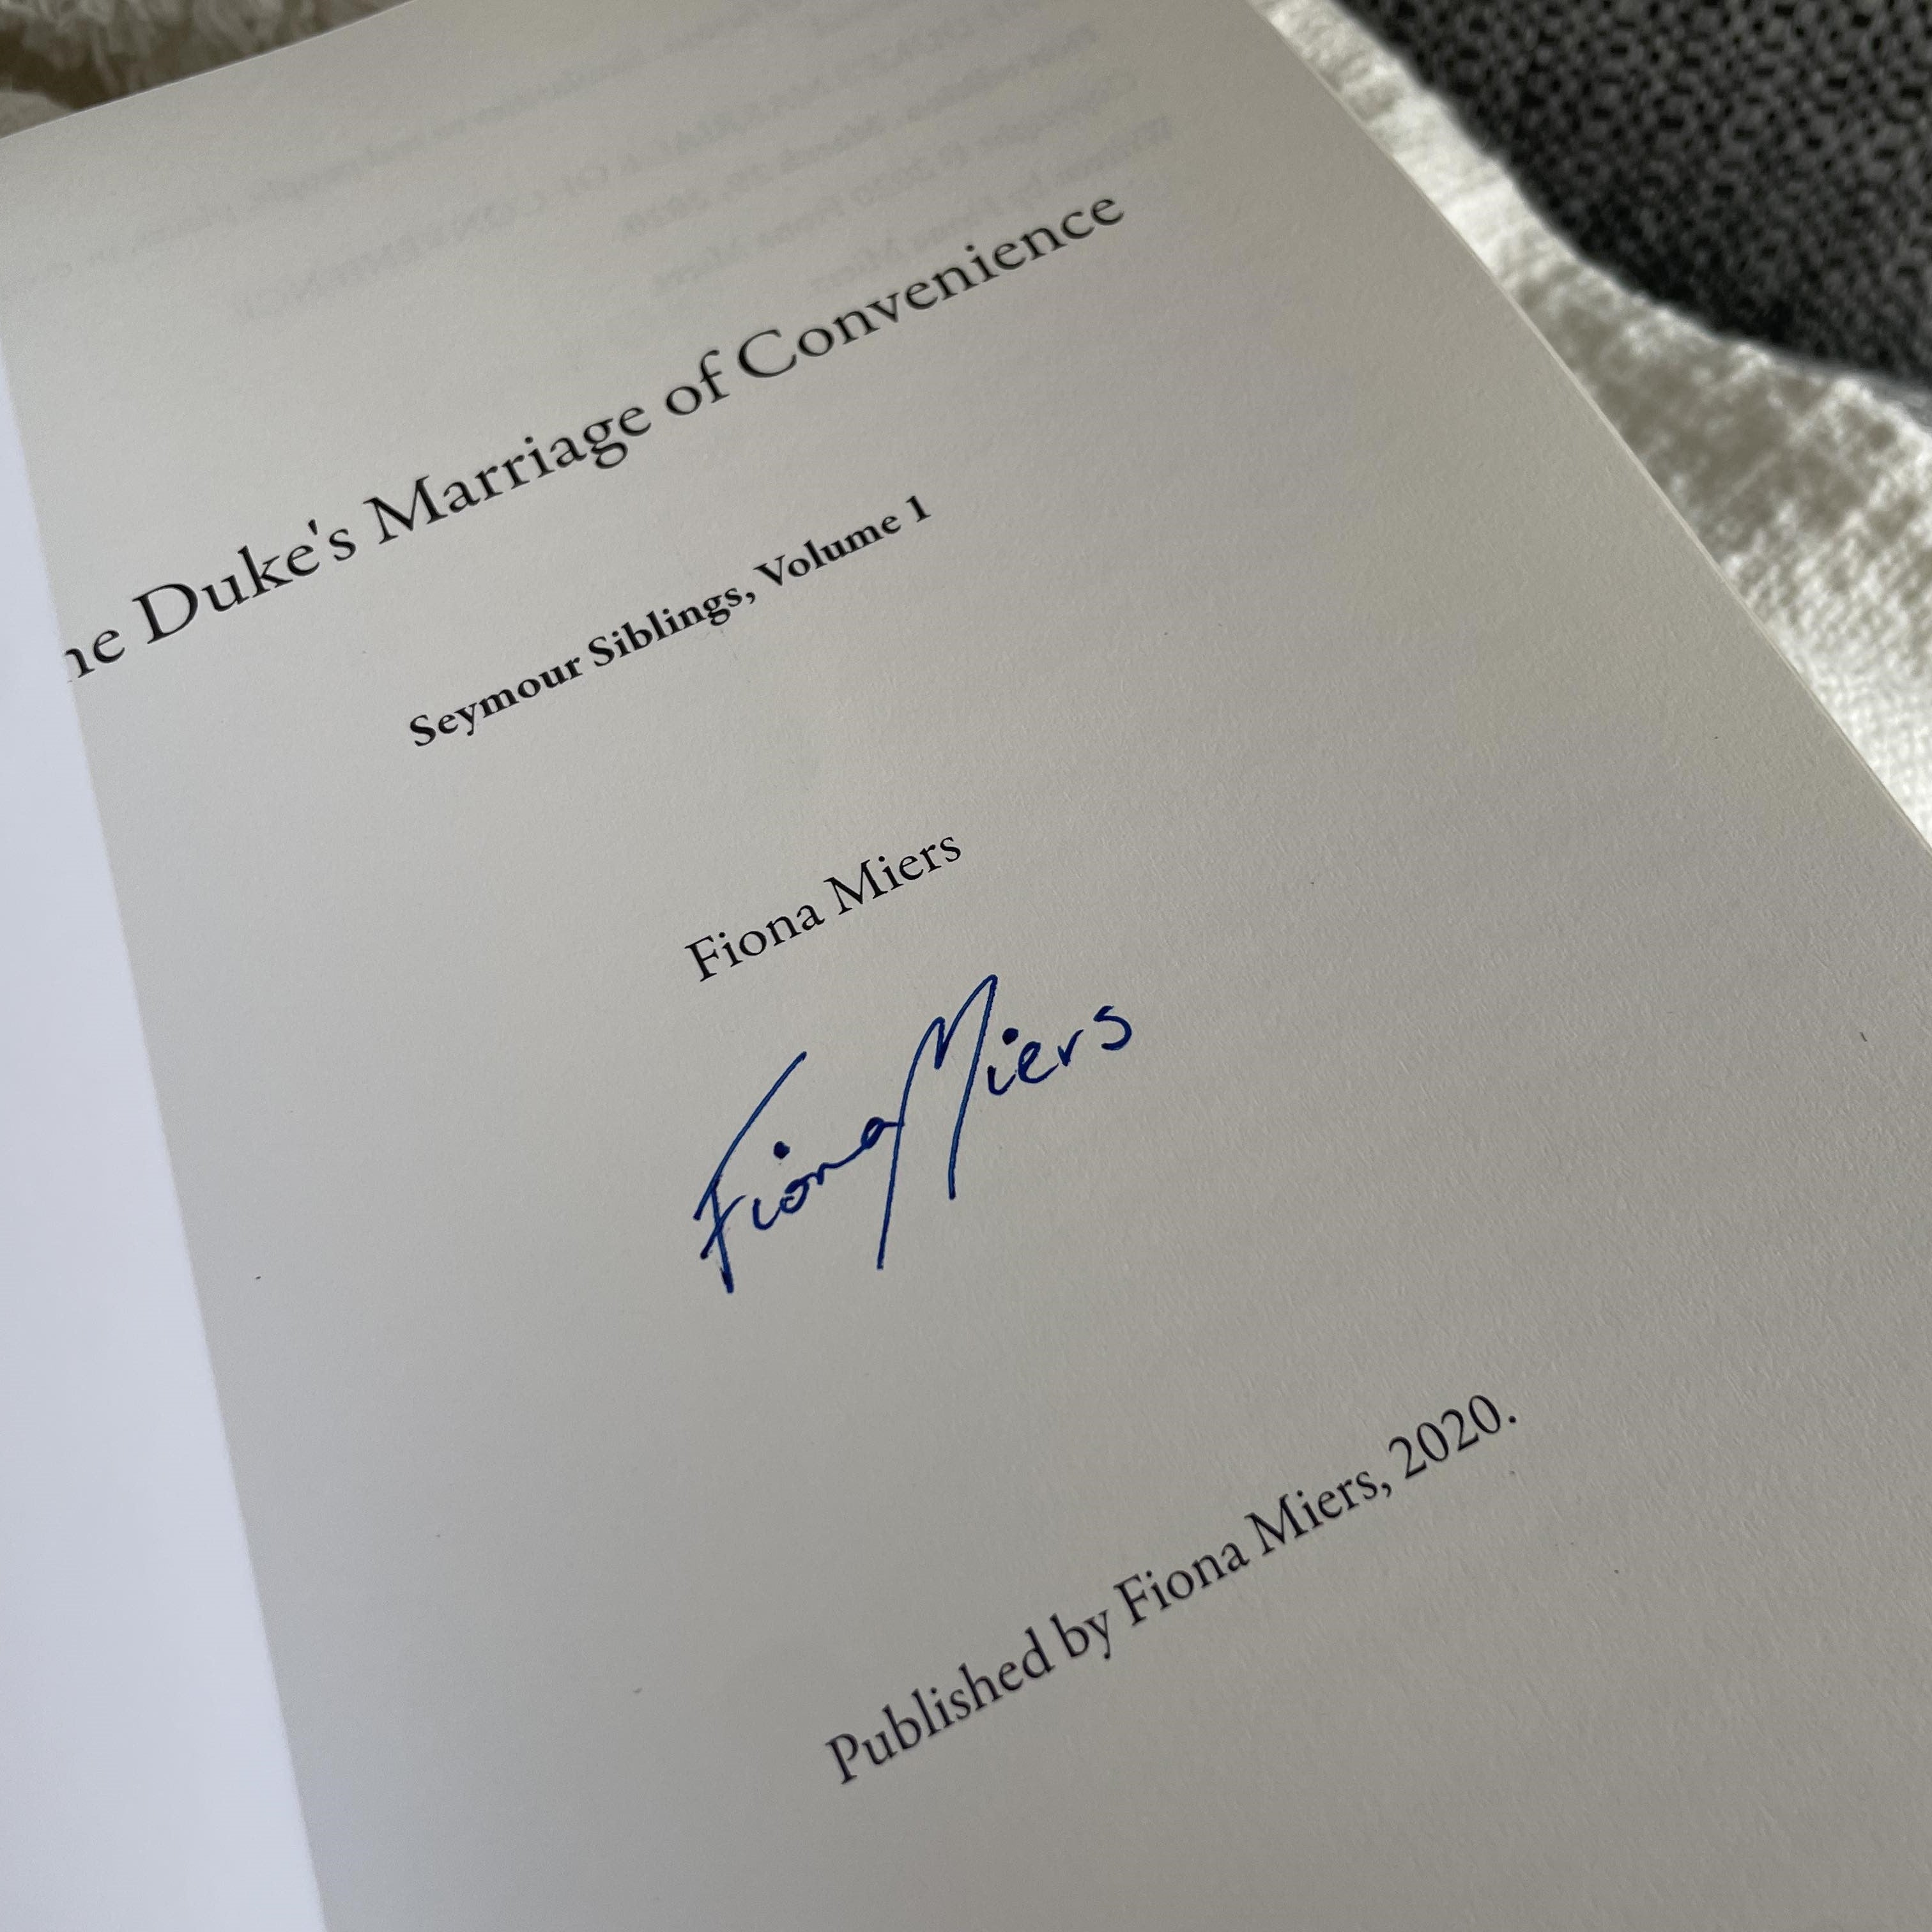 The Duke's Marriage of Convenience by Fiona Miers